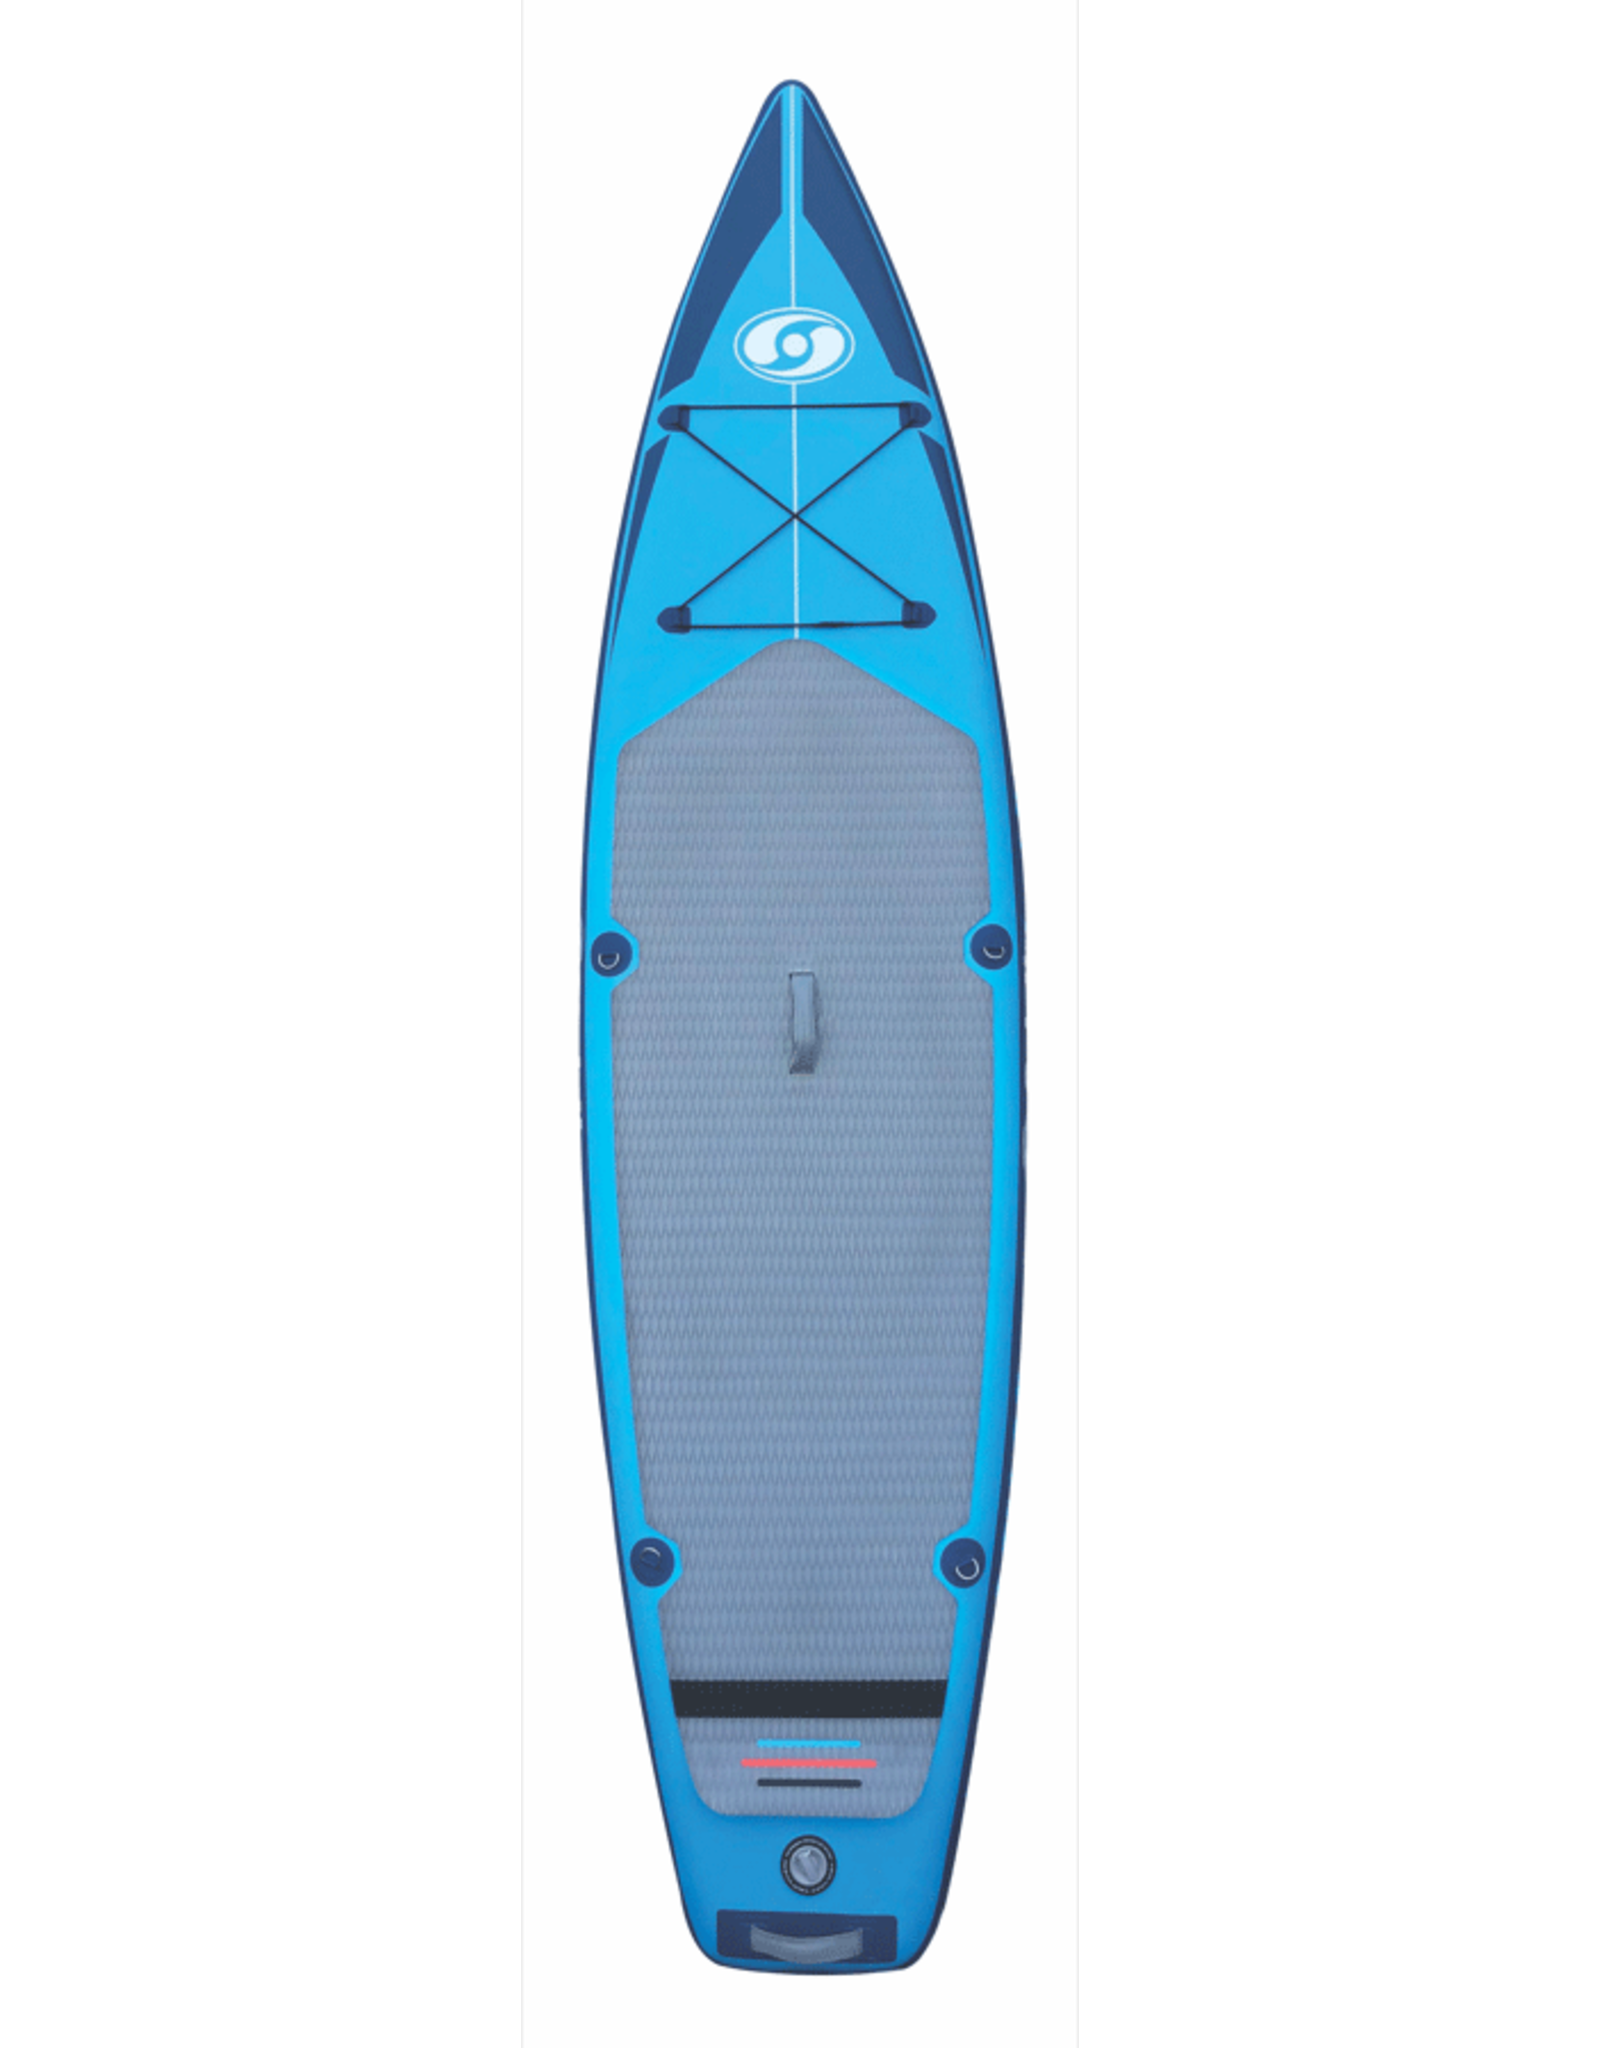 Solstice Touring Inflatable Stand-Up Paddleboard Kit 11'